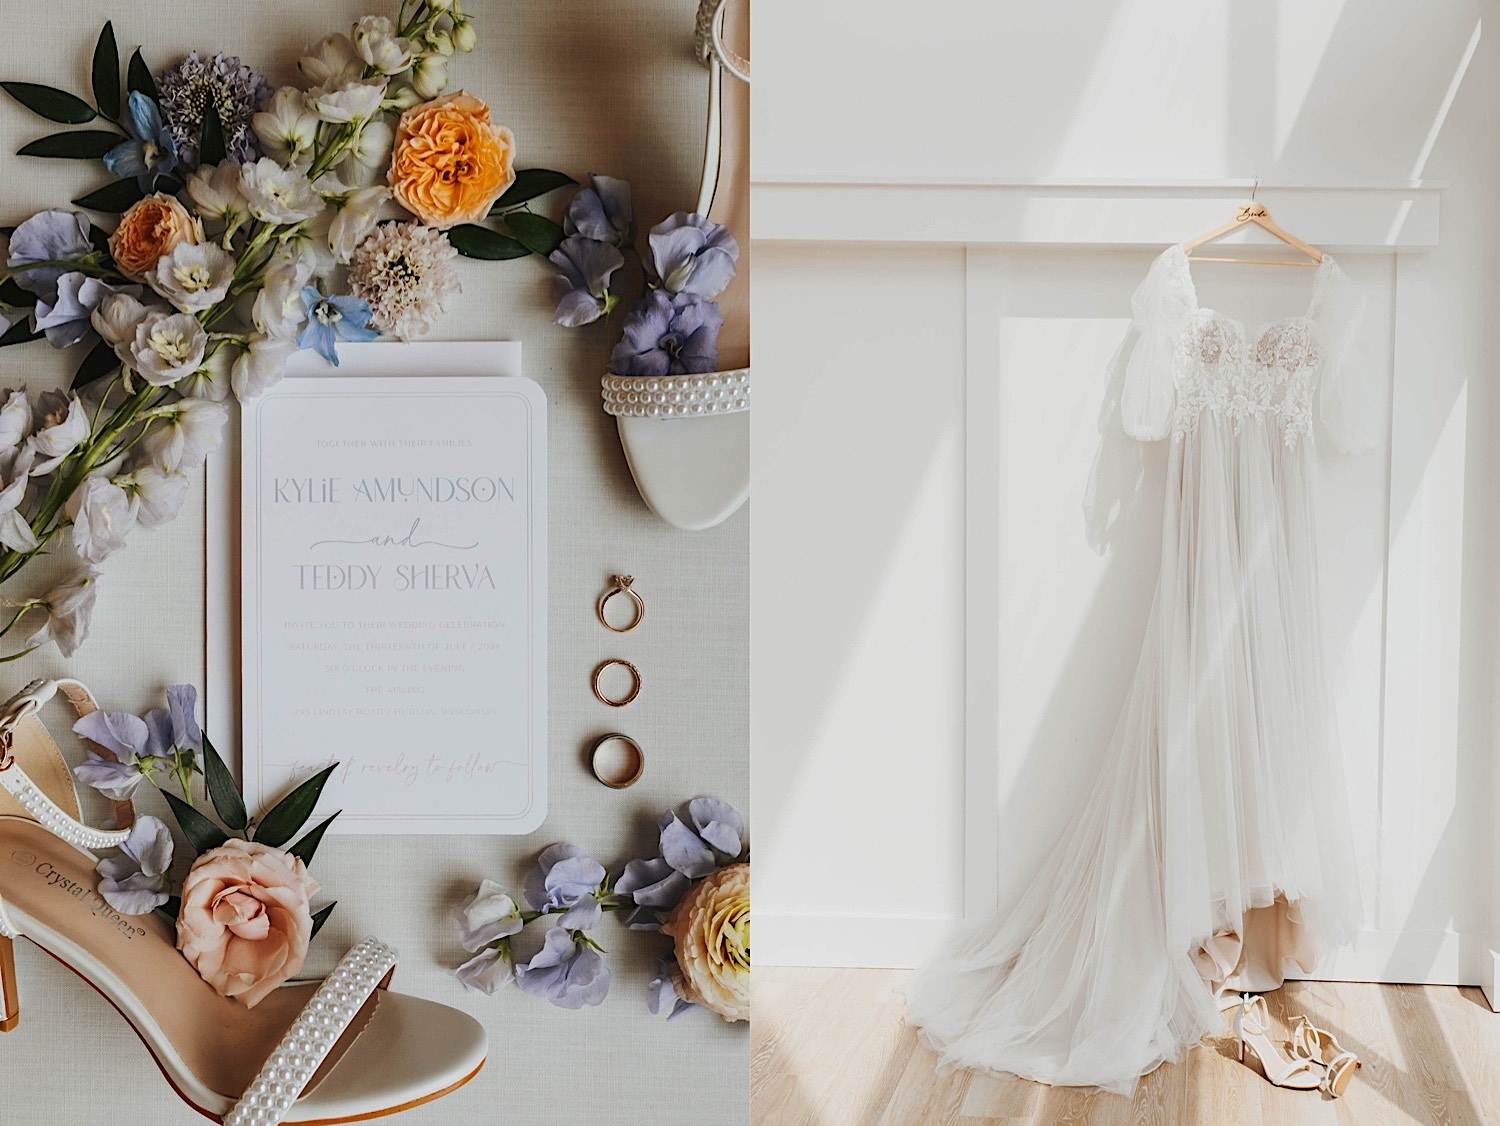 2 photos side by side, the left is of a wedding invite surrounded by flowers on a table, the right is of a wedding dress hanging on a wall